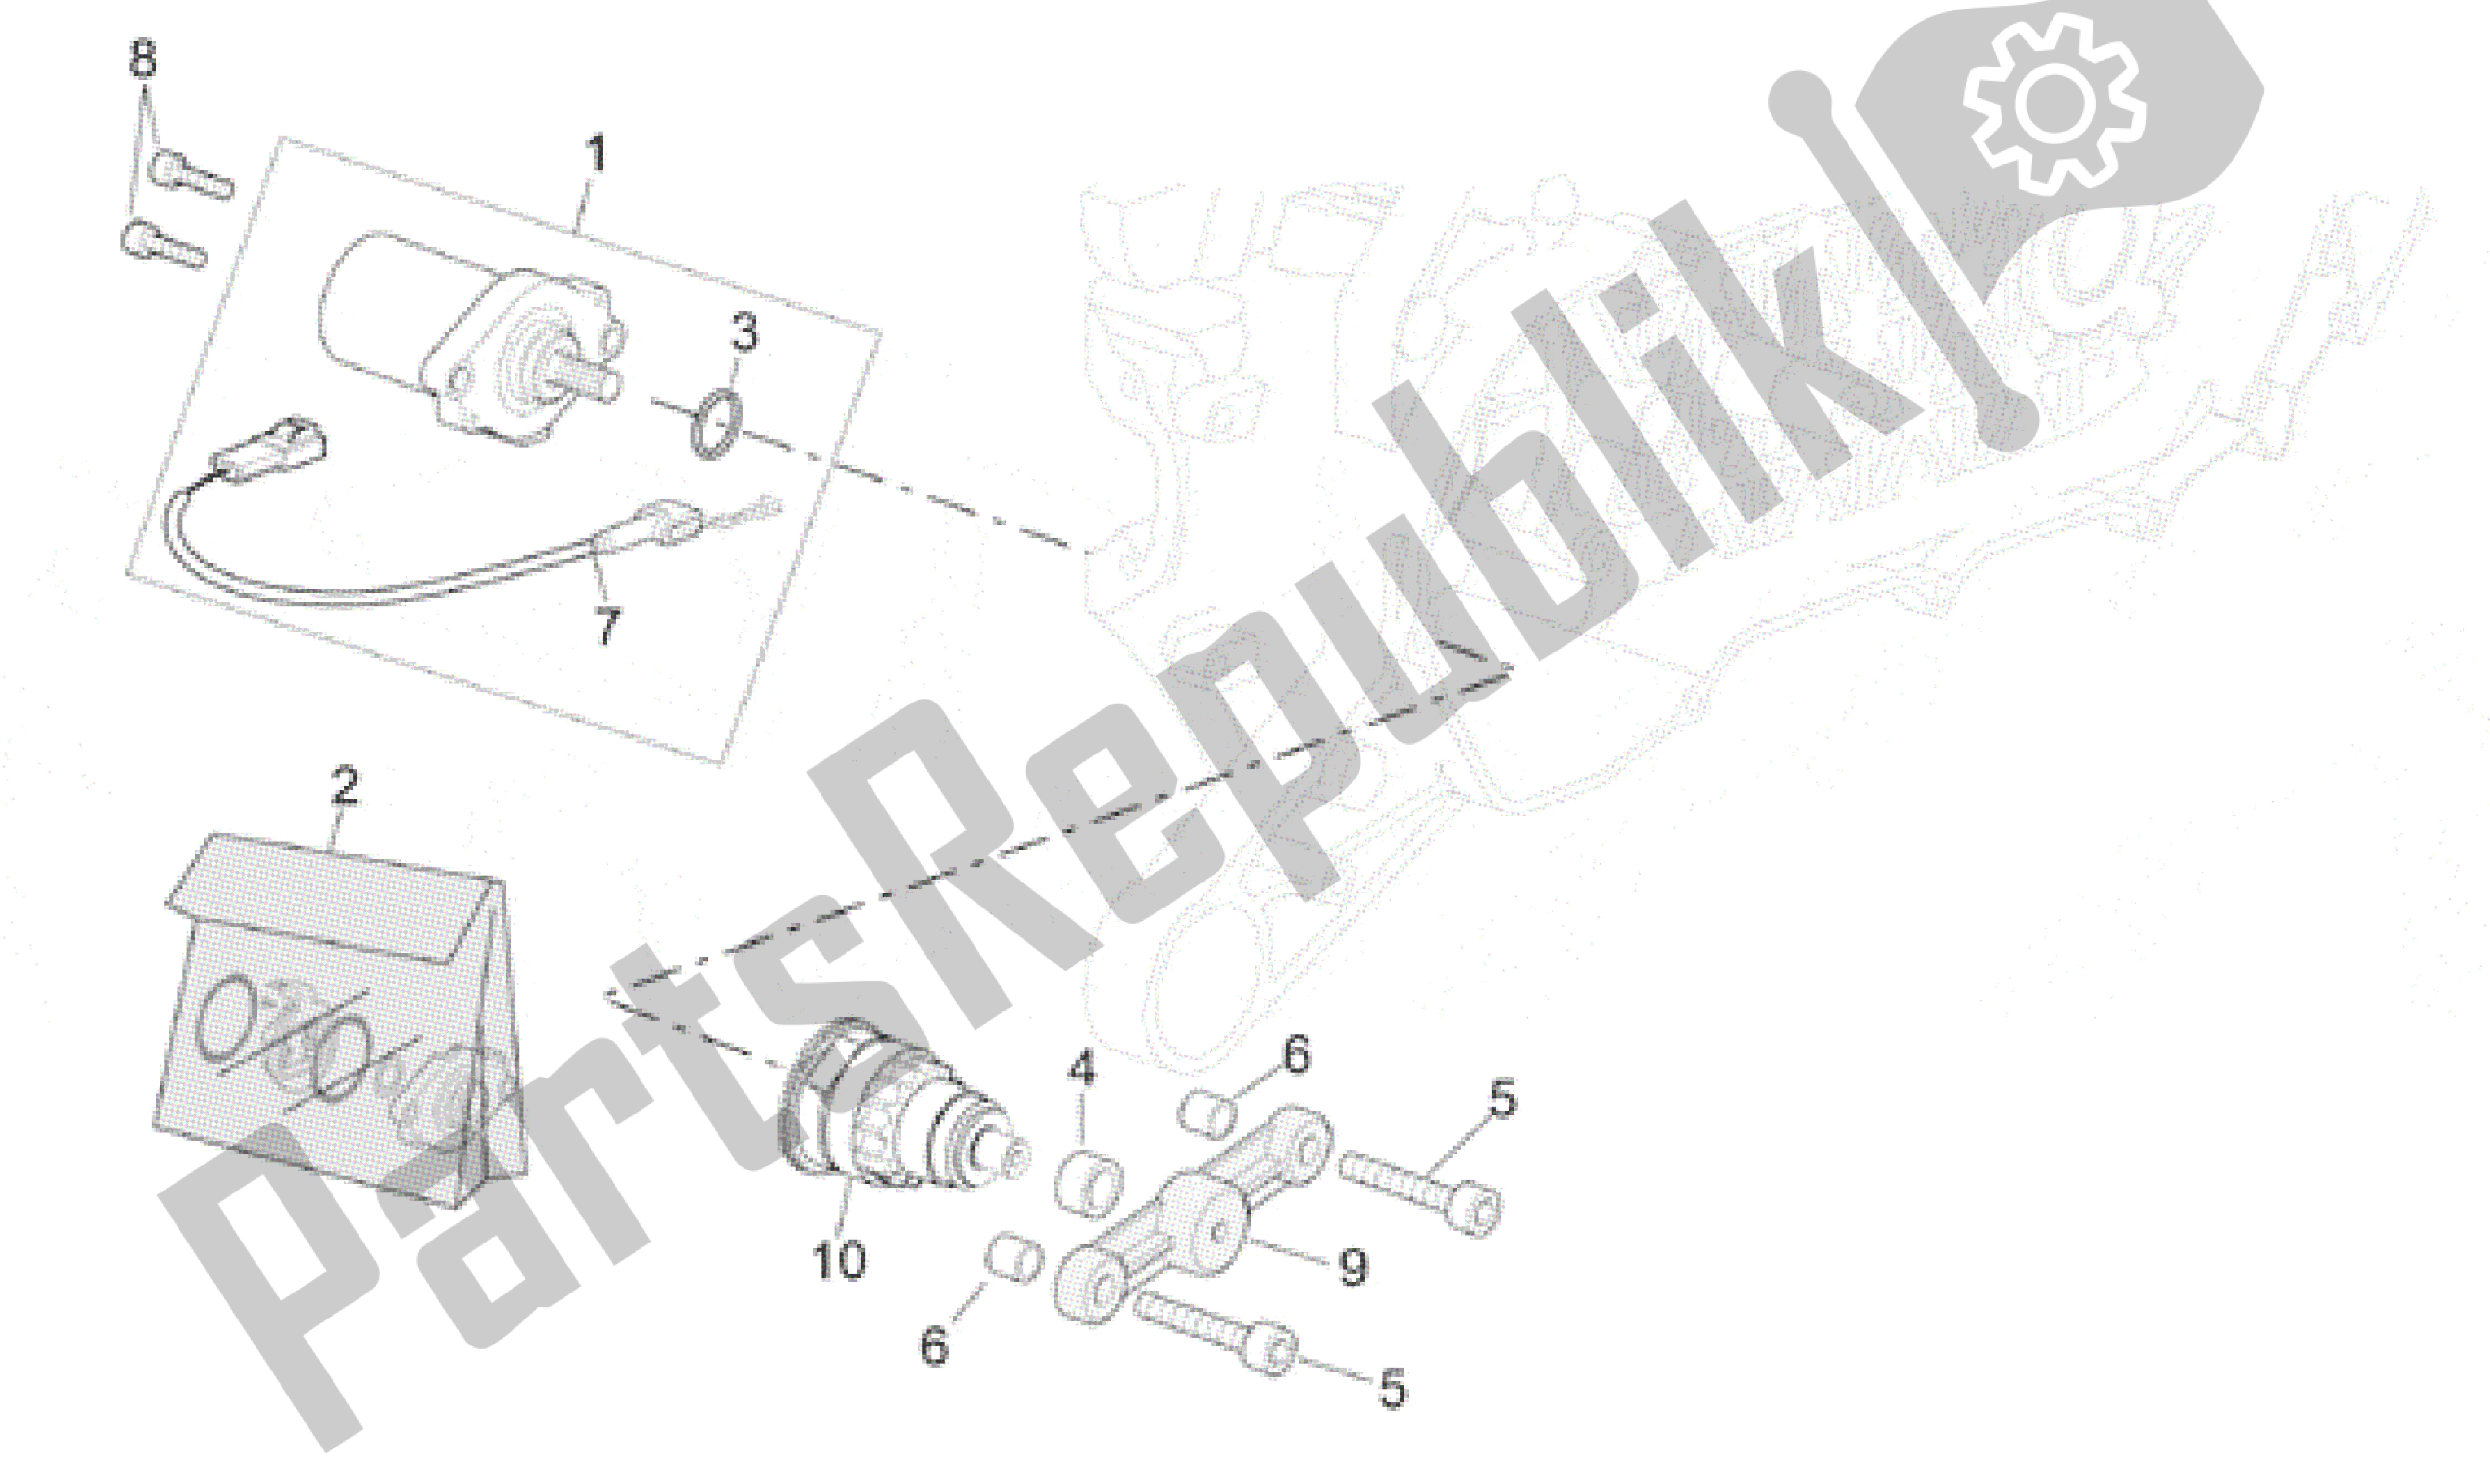 All parts for the Starter Motor of the Aprilia Scarabeo 50 2001 - 2004